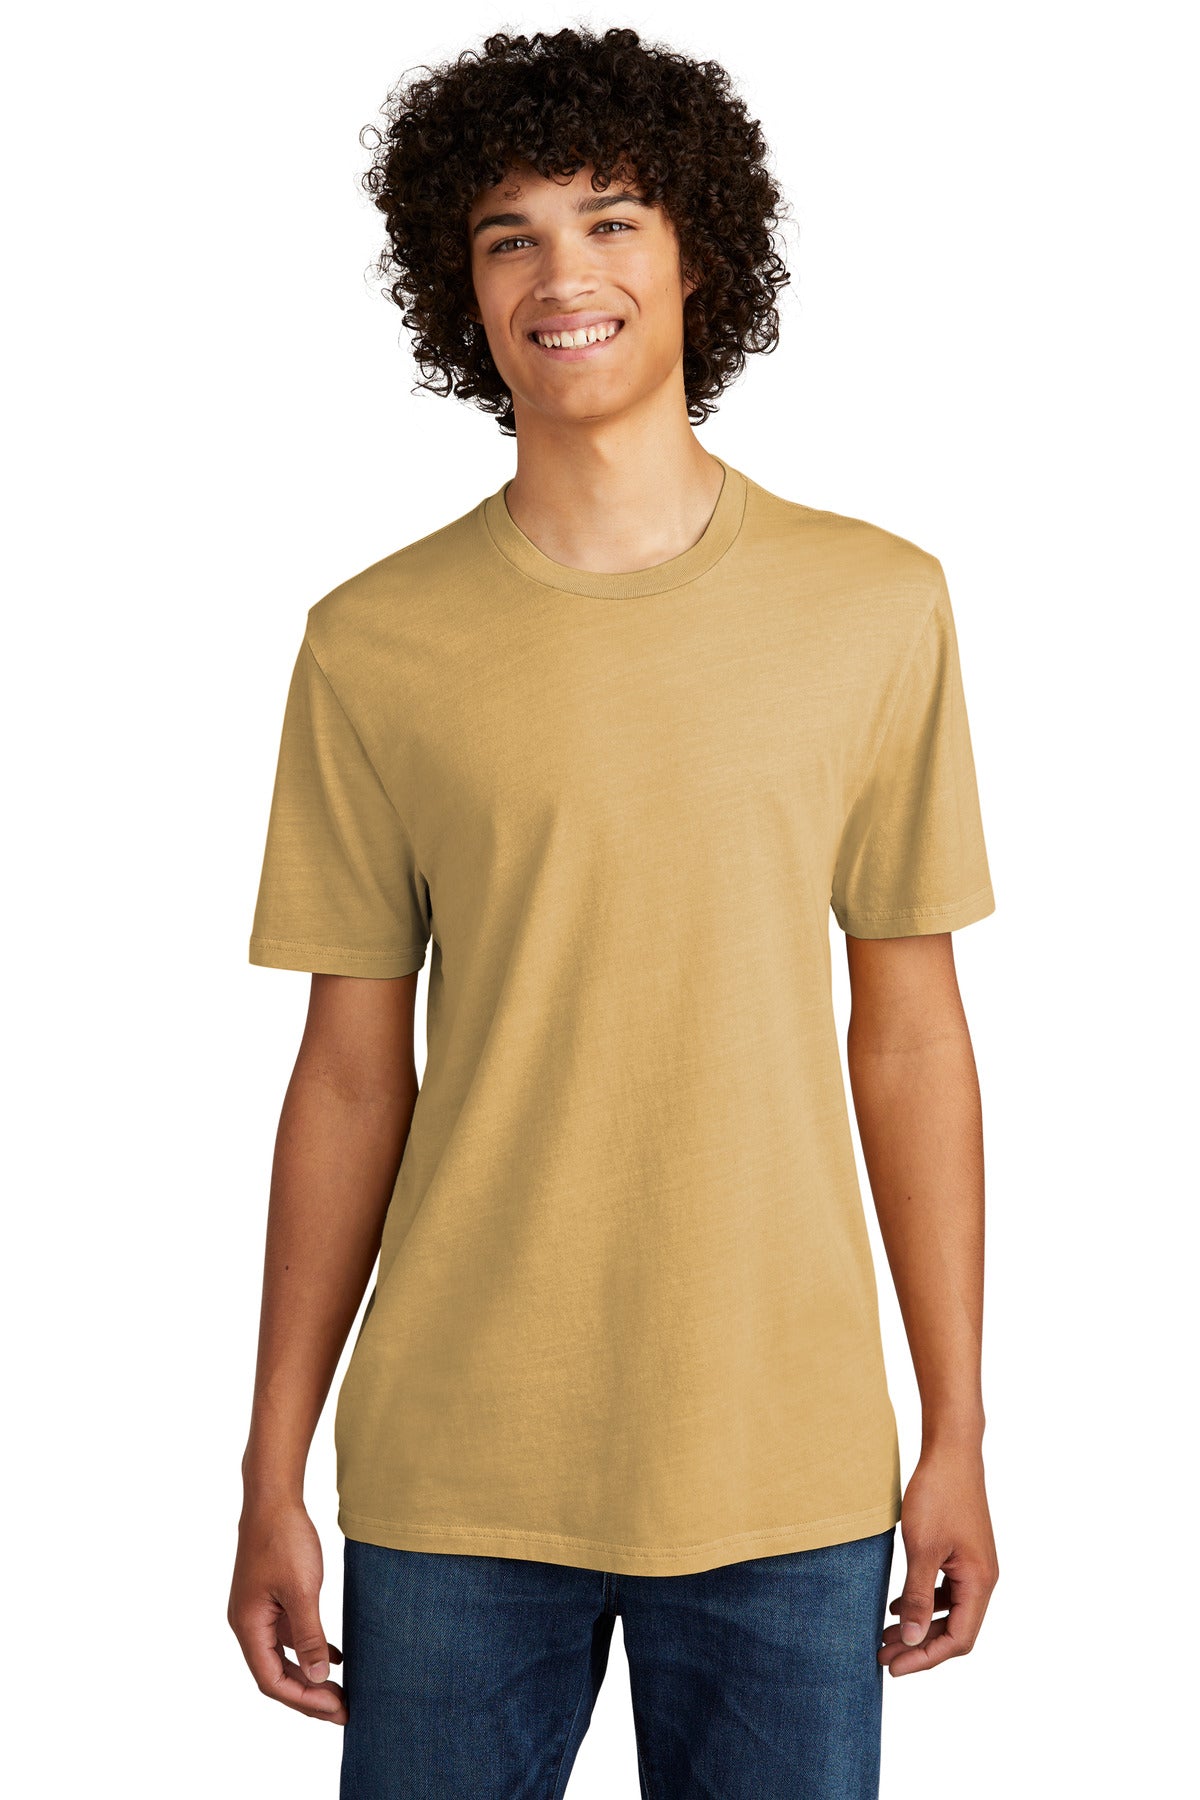 Photo of AllMade T-Shirts AL2400  color  Golden Wheat